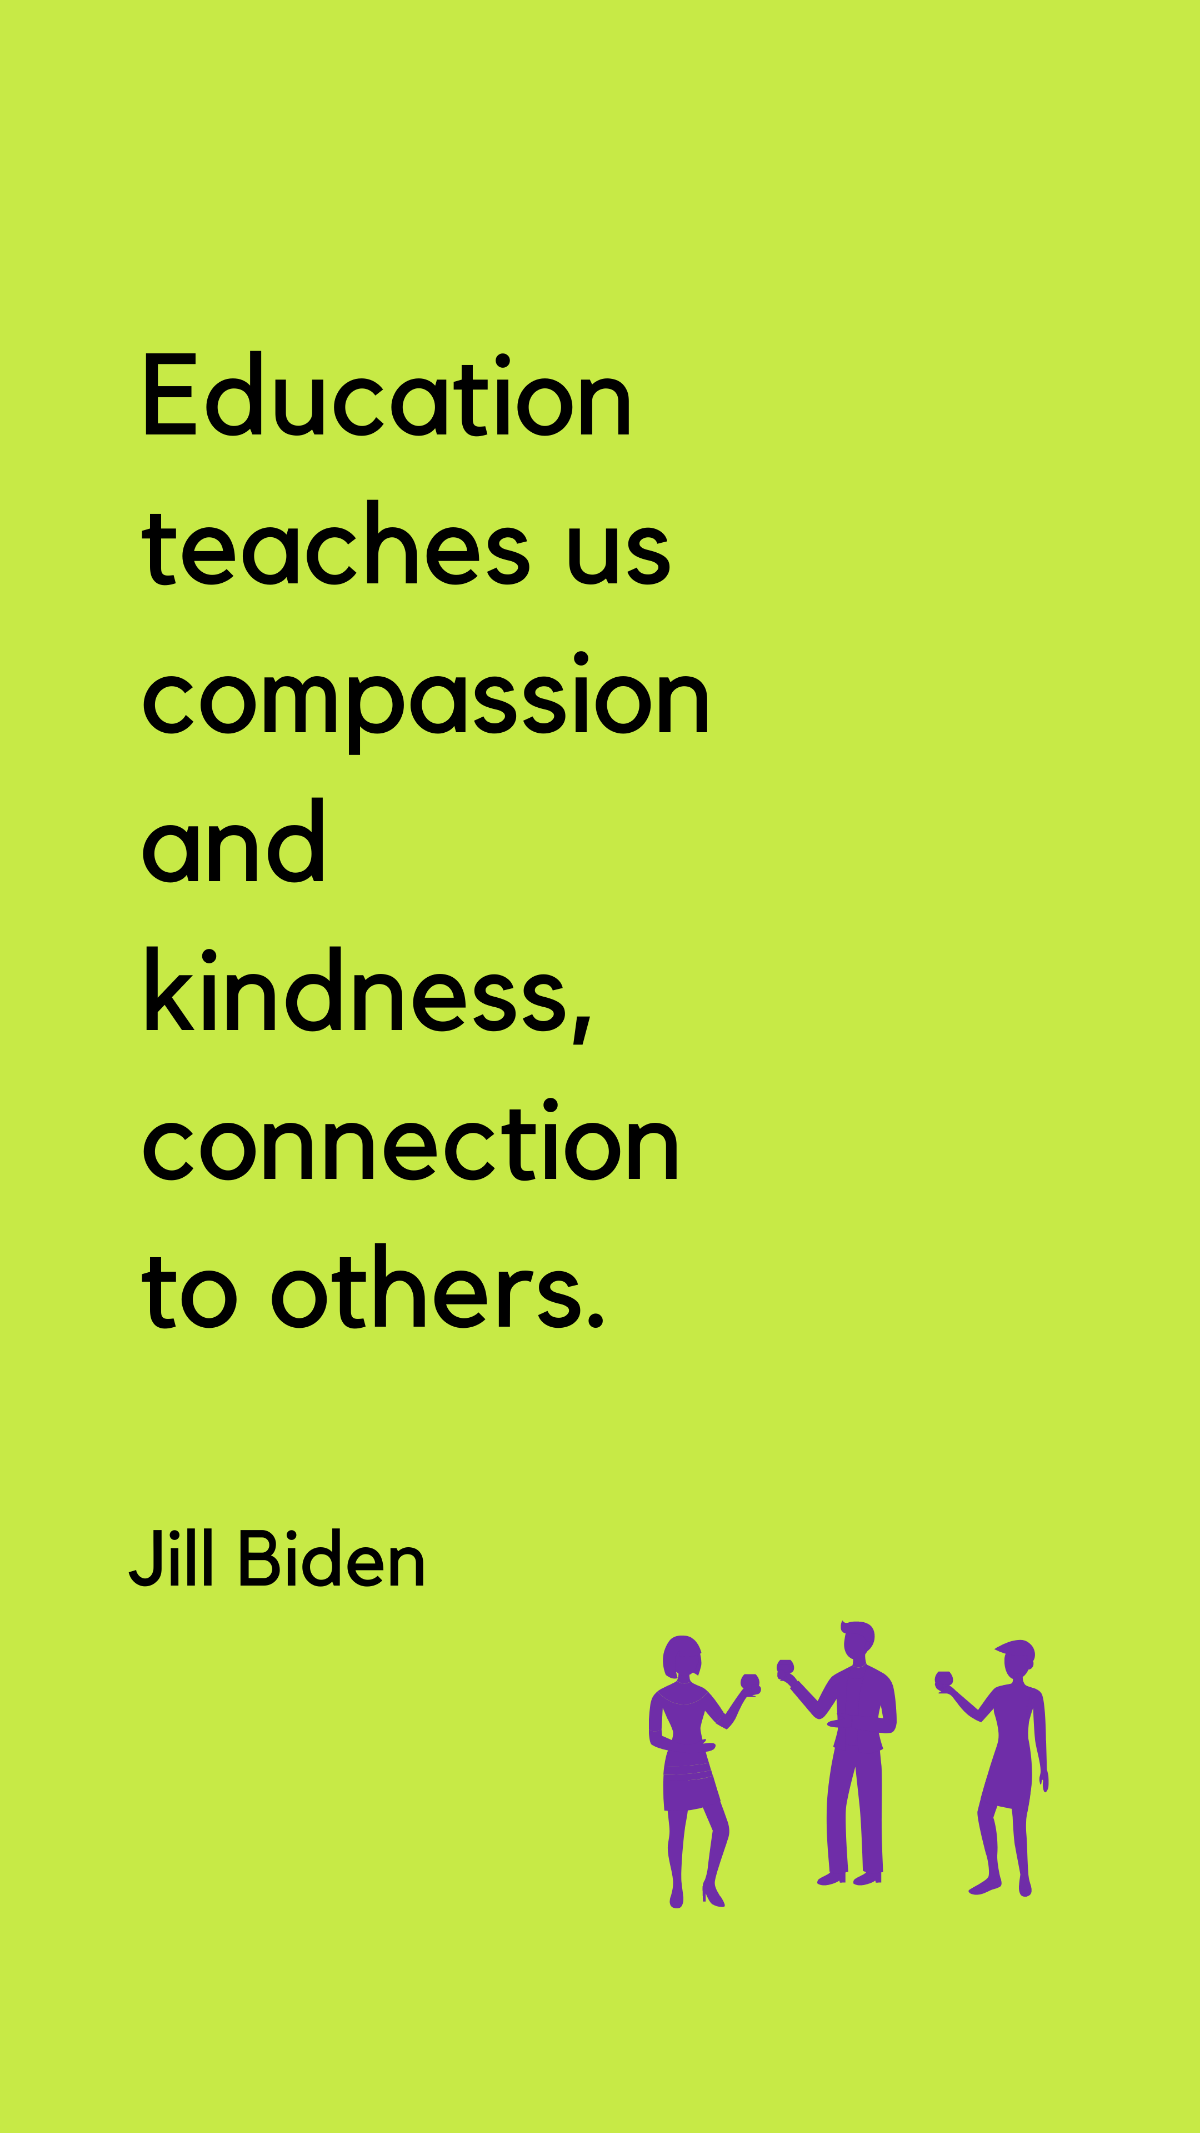 Jill Biden - Education teaches us compassion and kindness, connection to others. Template